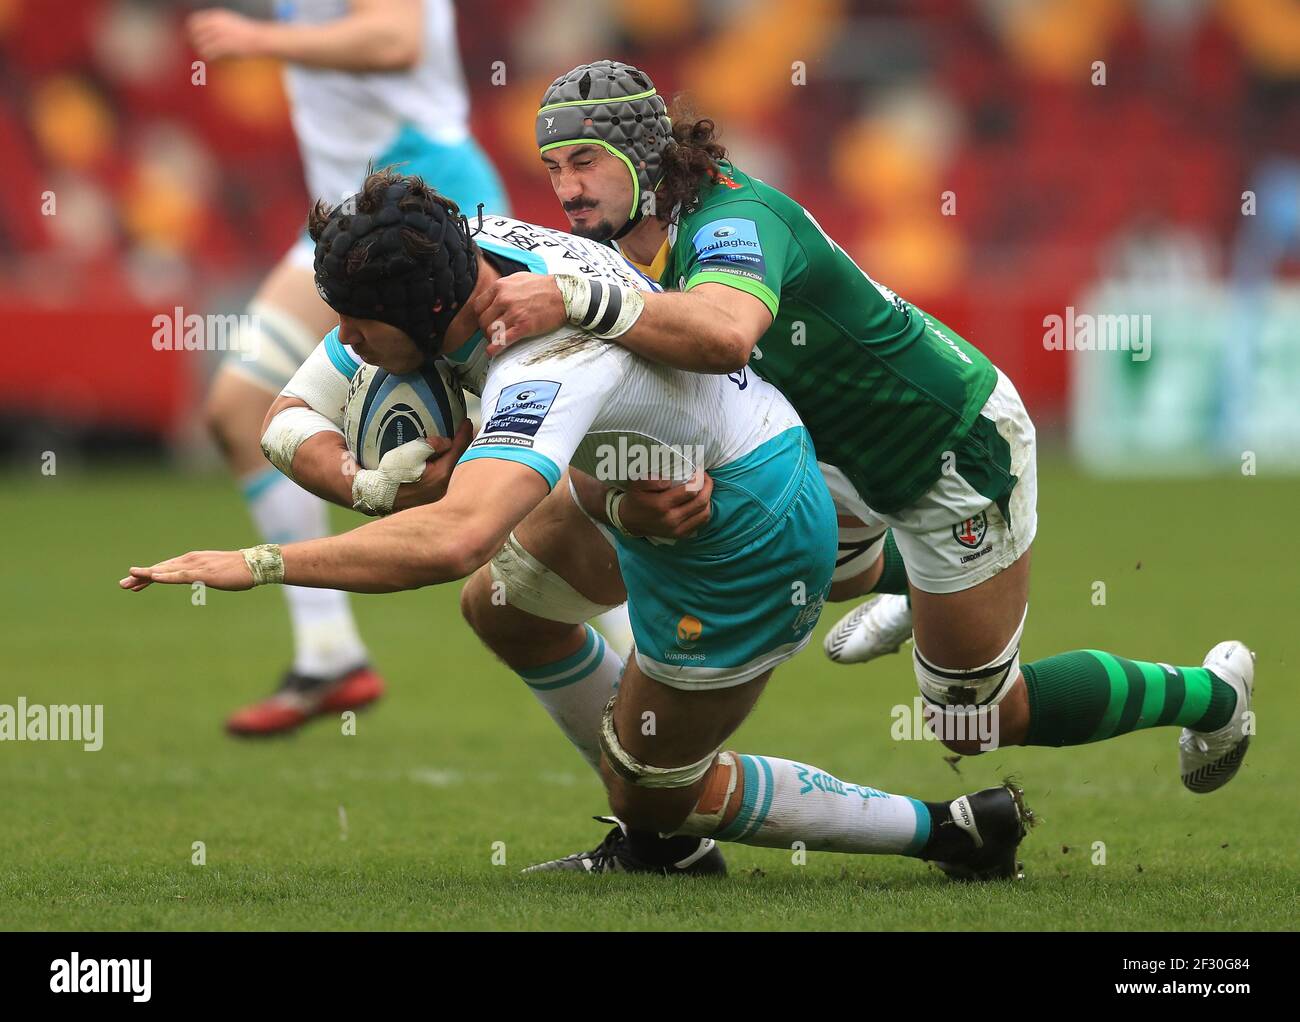 Worcester Warriors' Andrew Kitchener (left) is tackled by London Irish's Blair Cowan during the Gallagher Premiership match at the Brentford Community Stadium, London. Picture date: Sunday March 14, 2021. Stock Photo